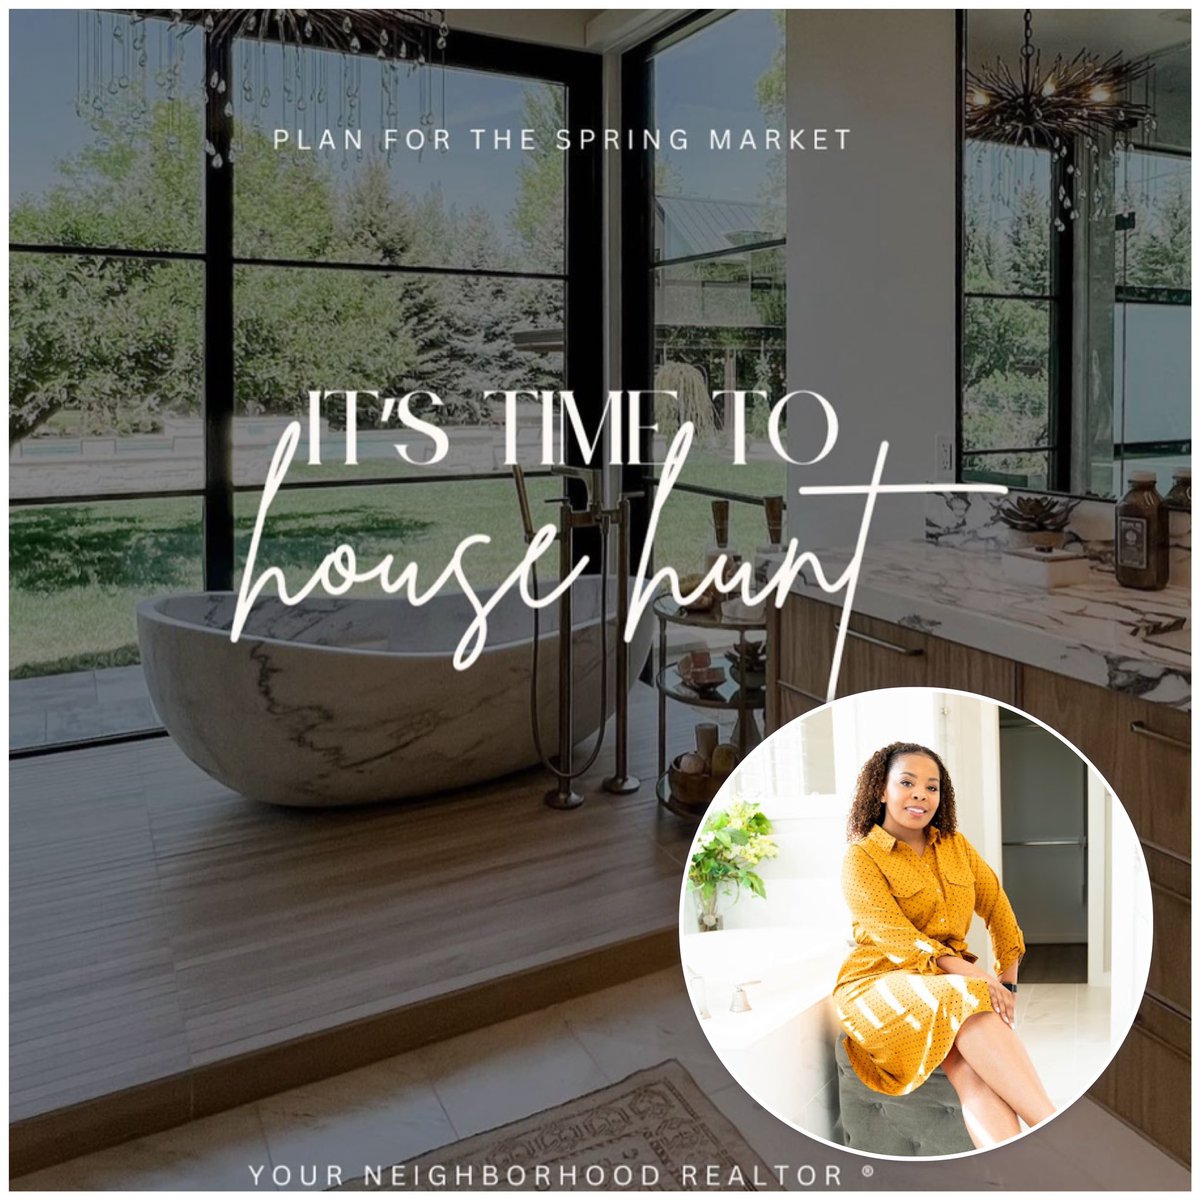 It’s almost spring and summer will be here before you know it.
Let’s discuss the current market and a strategy to get you where you want to be! 
#realestatecharita #homegirl #houstonhomesforsale #movetohouston #relocation #newconstructionhomes #homebuyingtips #sellyourhome